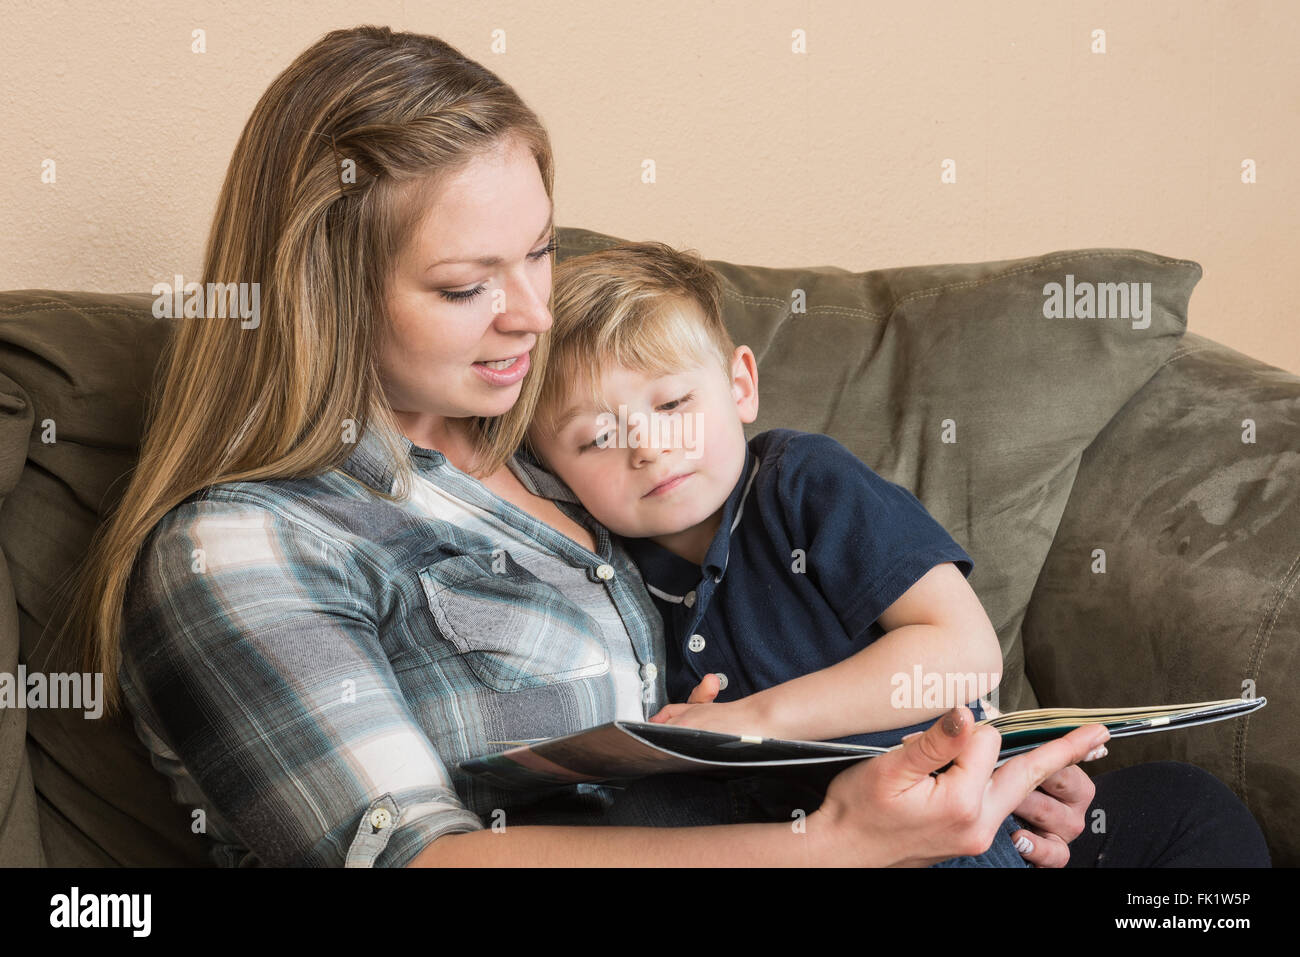 A young boy snuggles into his mother as she reads him a book. Stock Photo